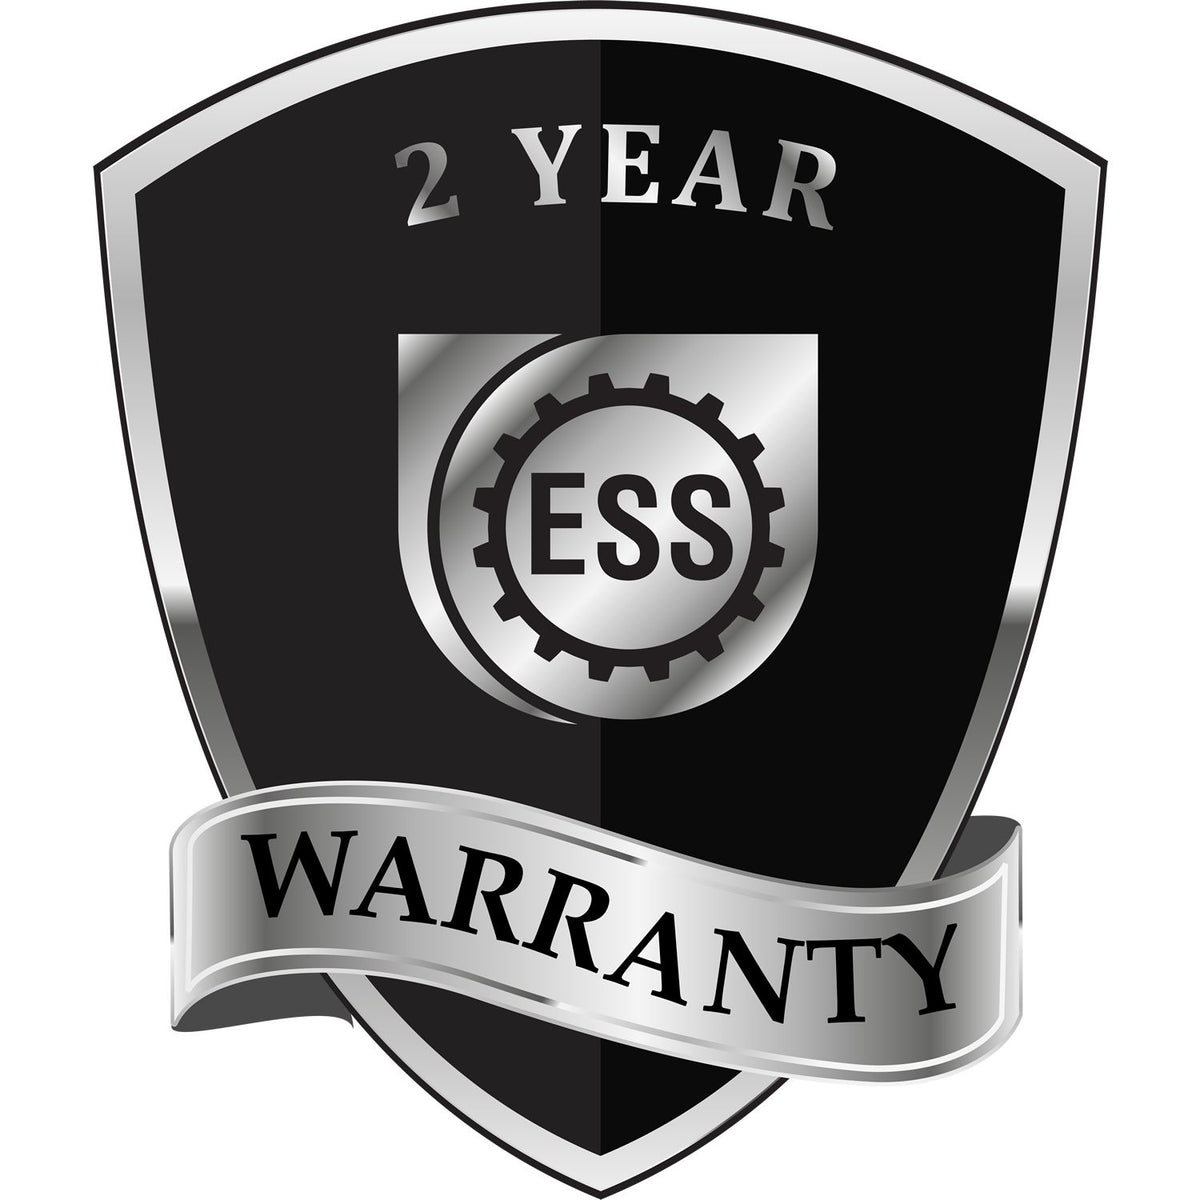 A badge or emblem showing a warranty icon for the Kansas Desk Architect Embossing Seal